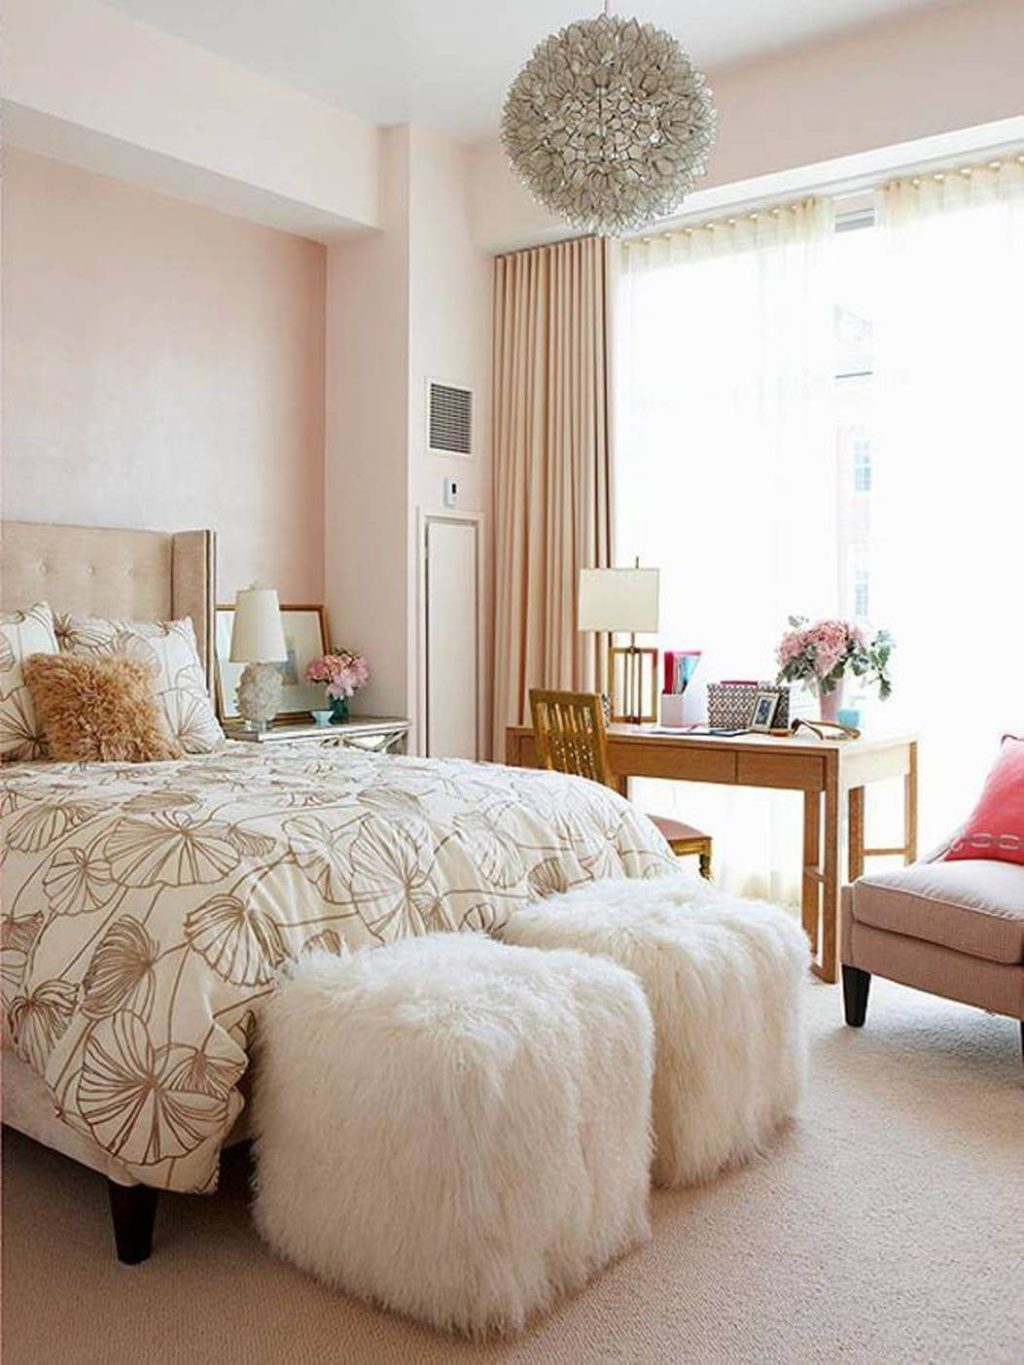 Soft Pink Top 10 Outdated Home Decorating Trends to Avoid - 6